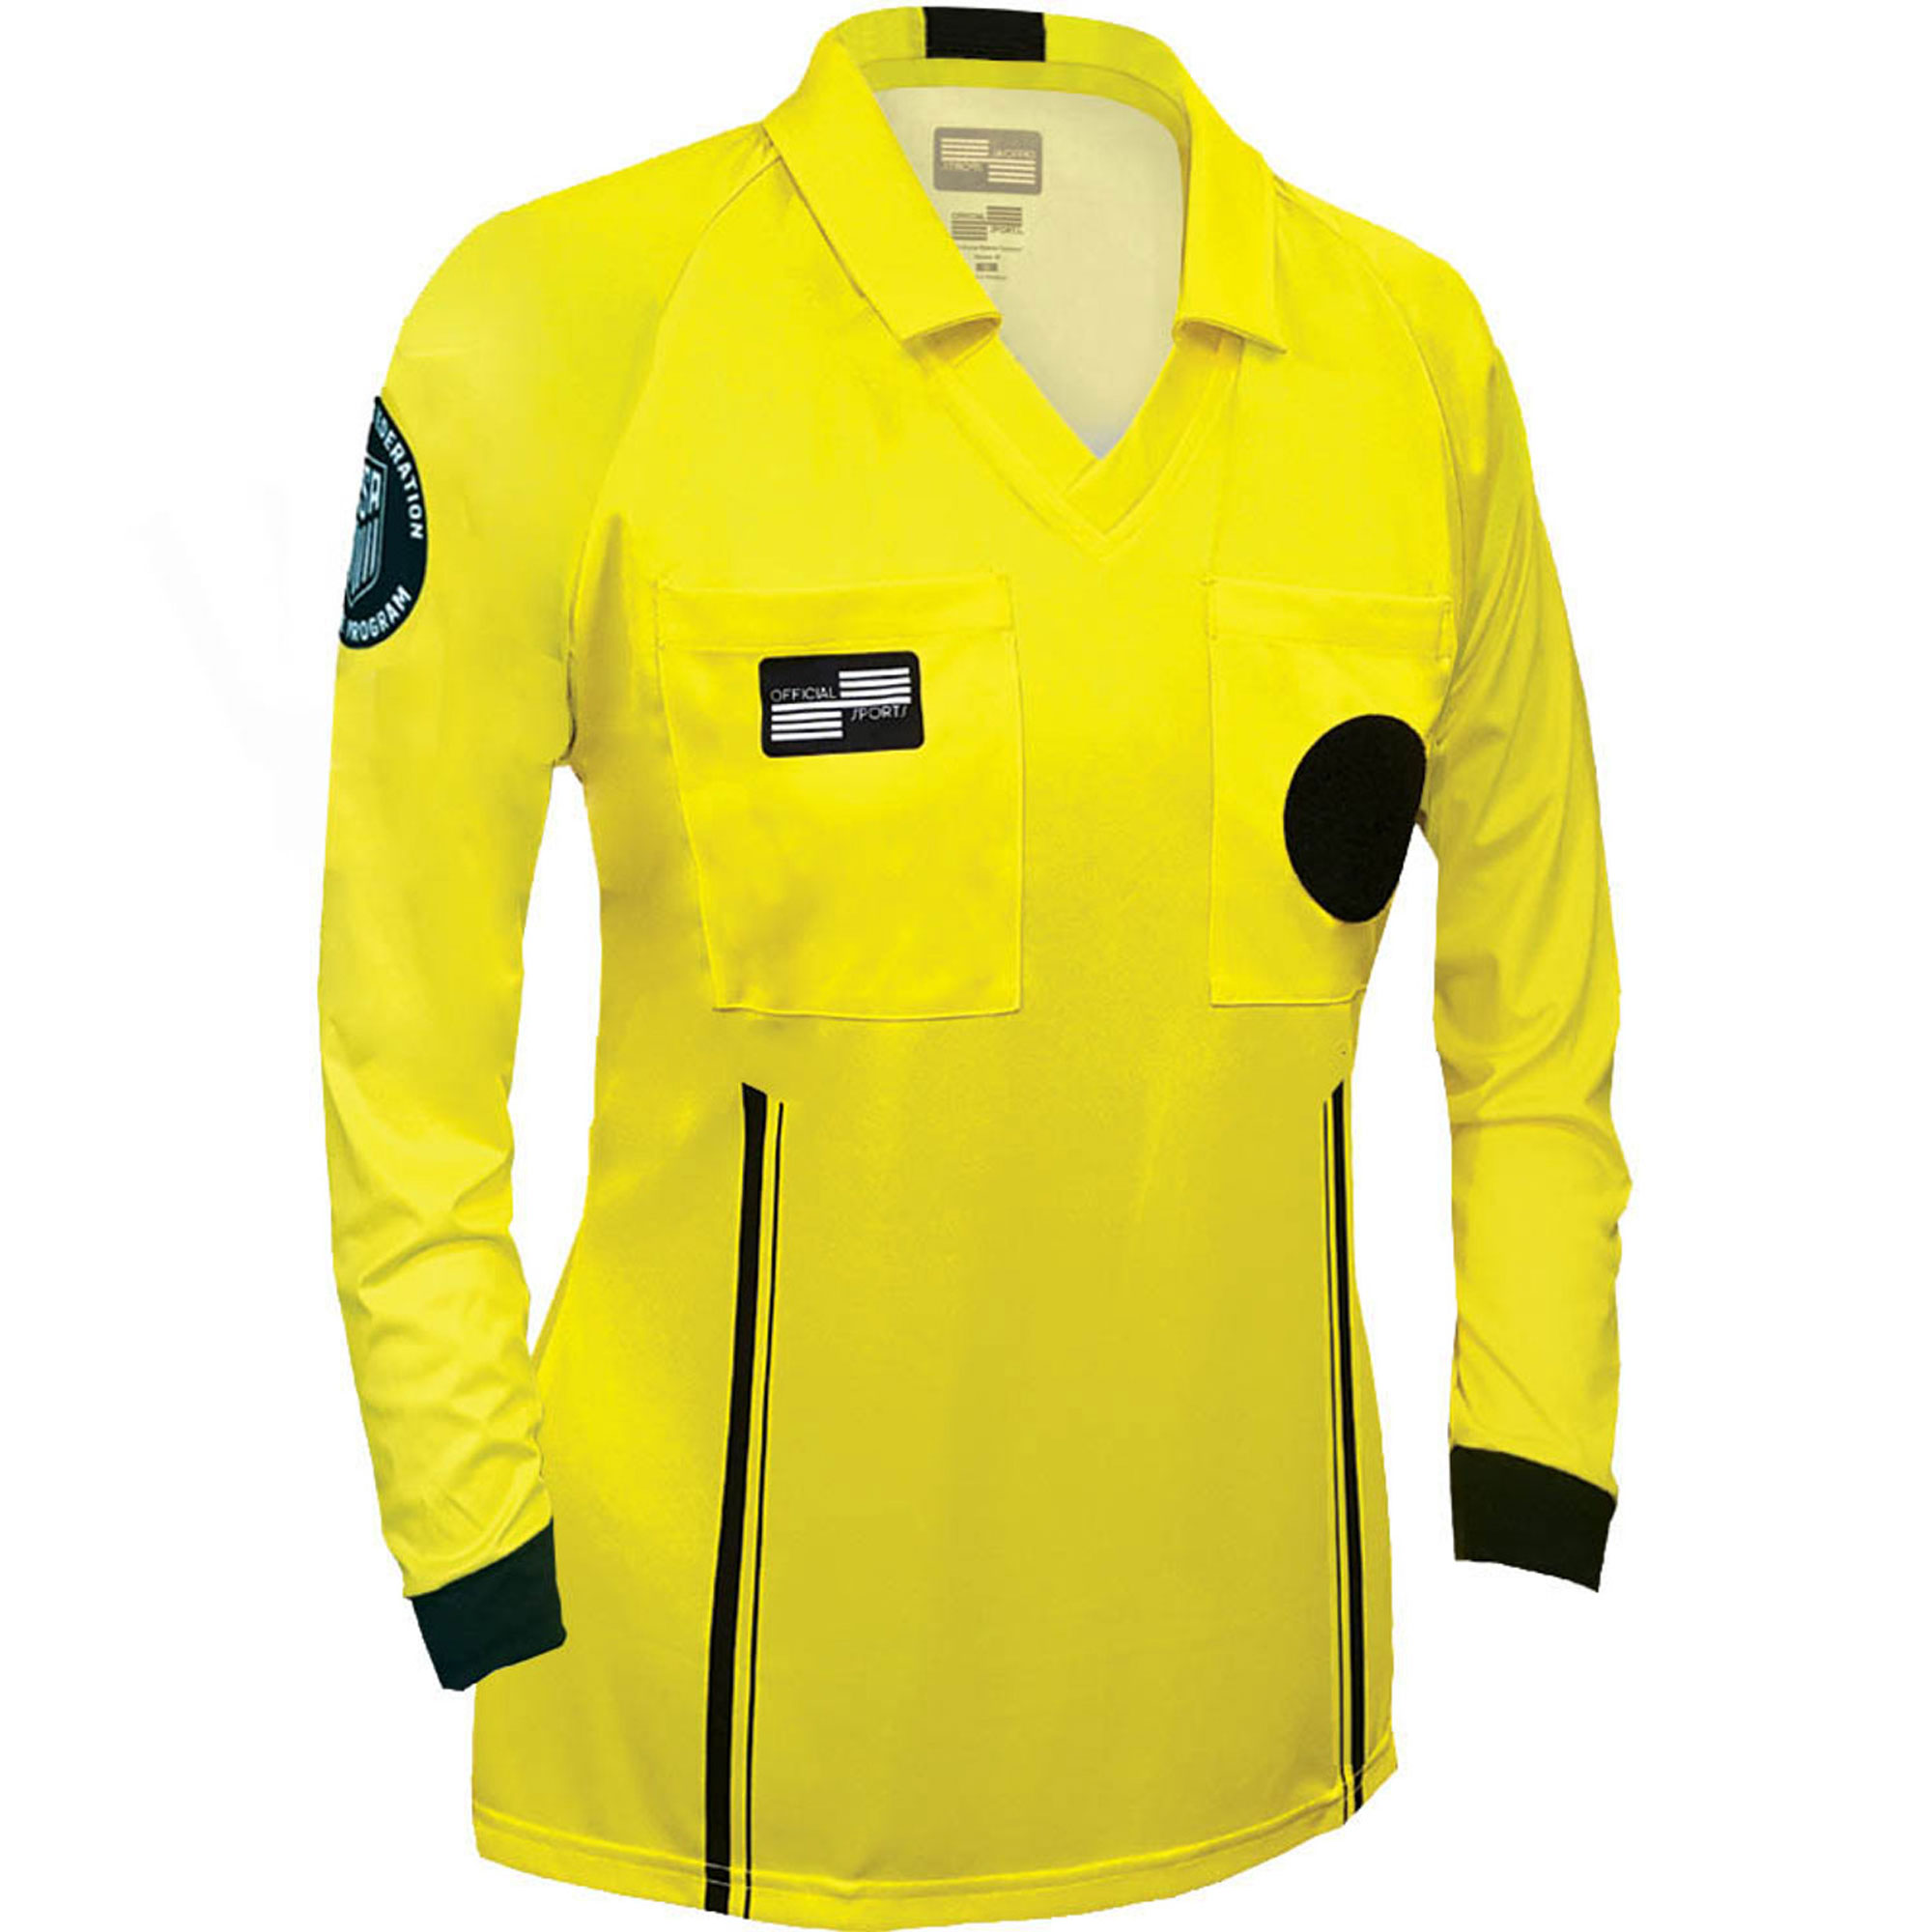 Thapower Women's Official Referee Shirt